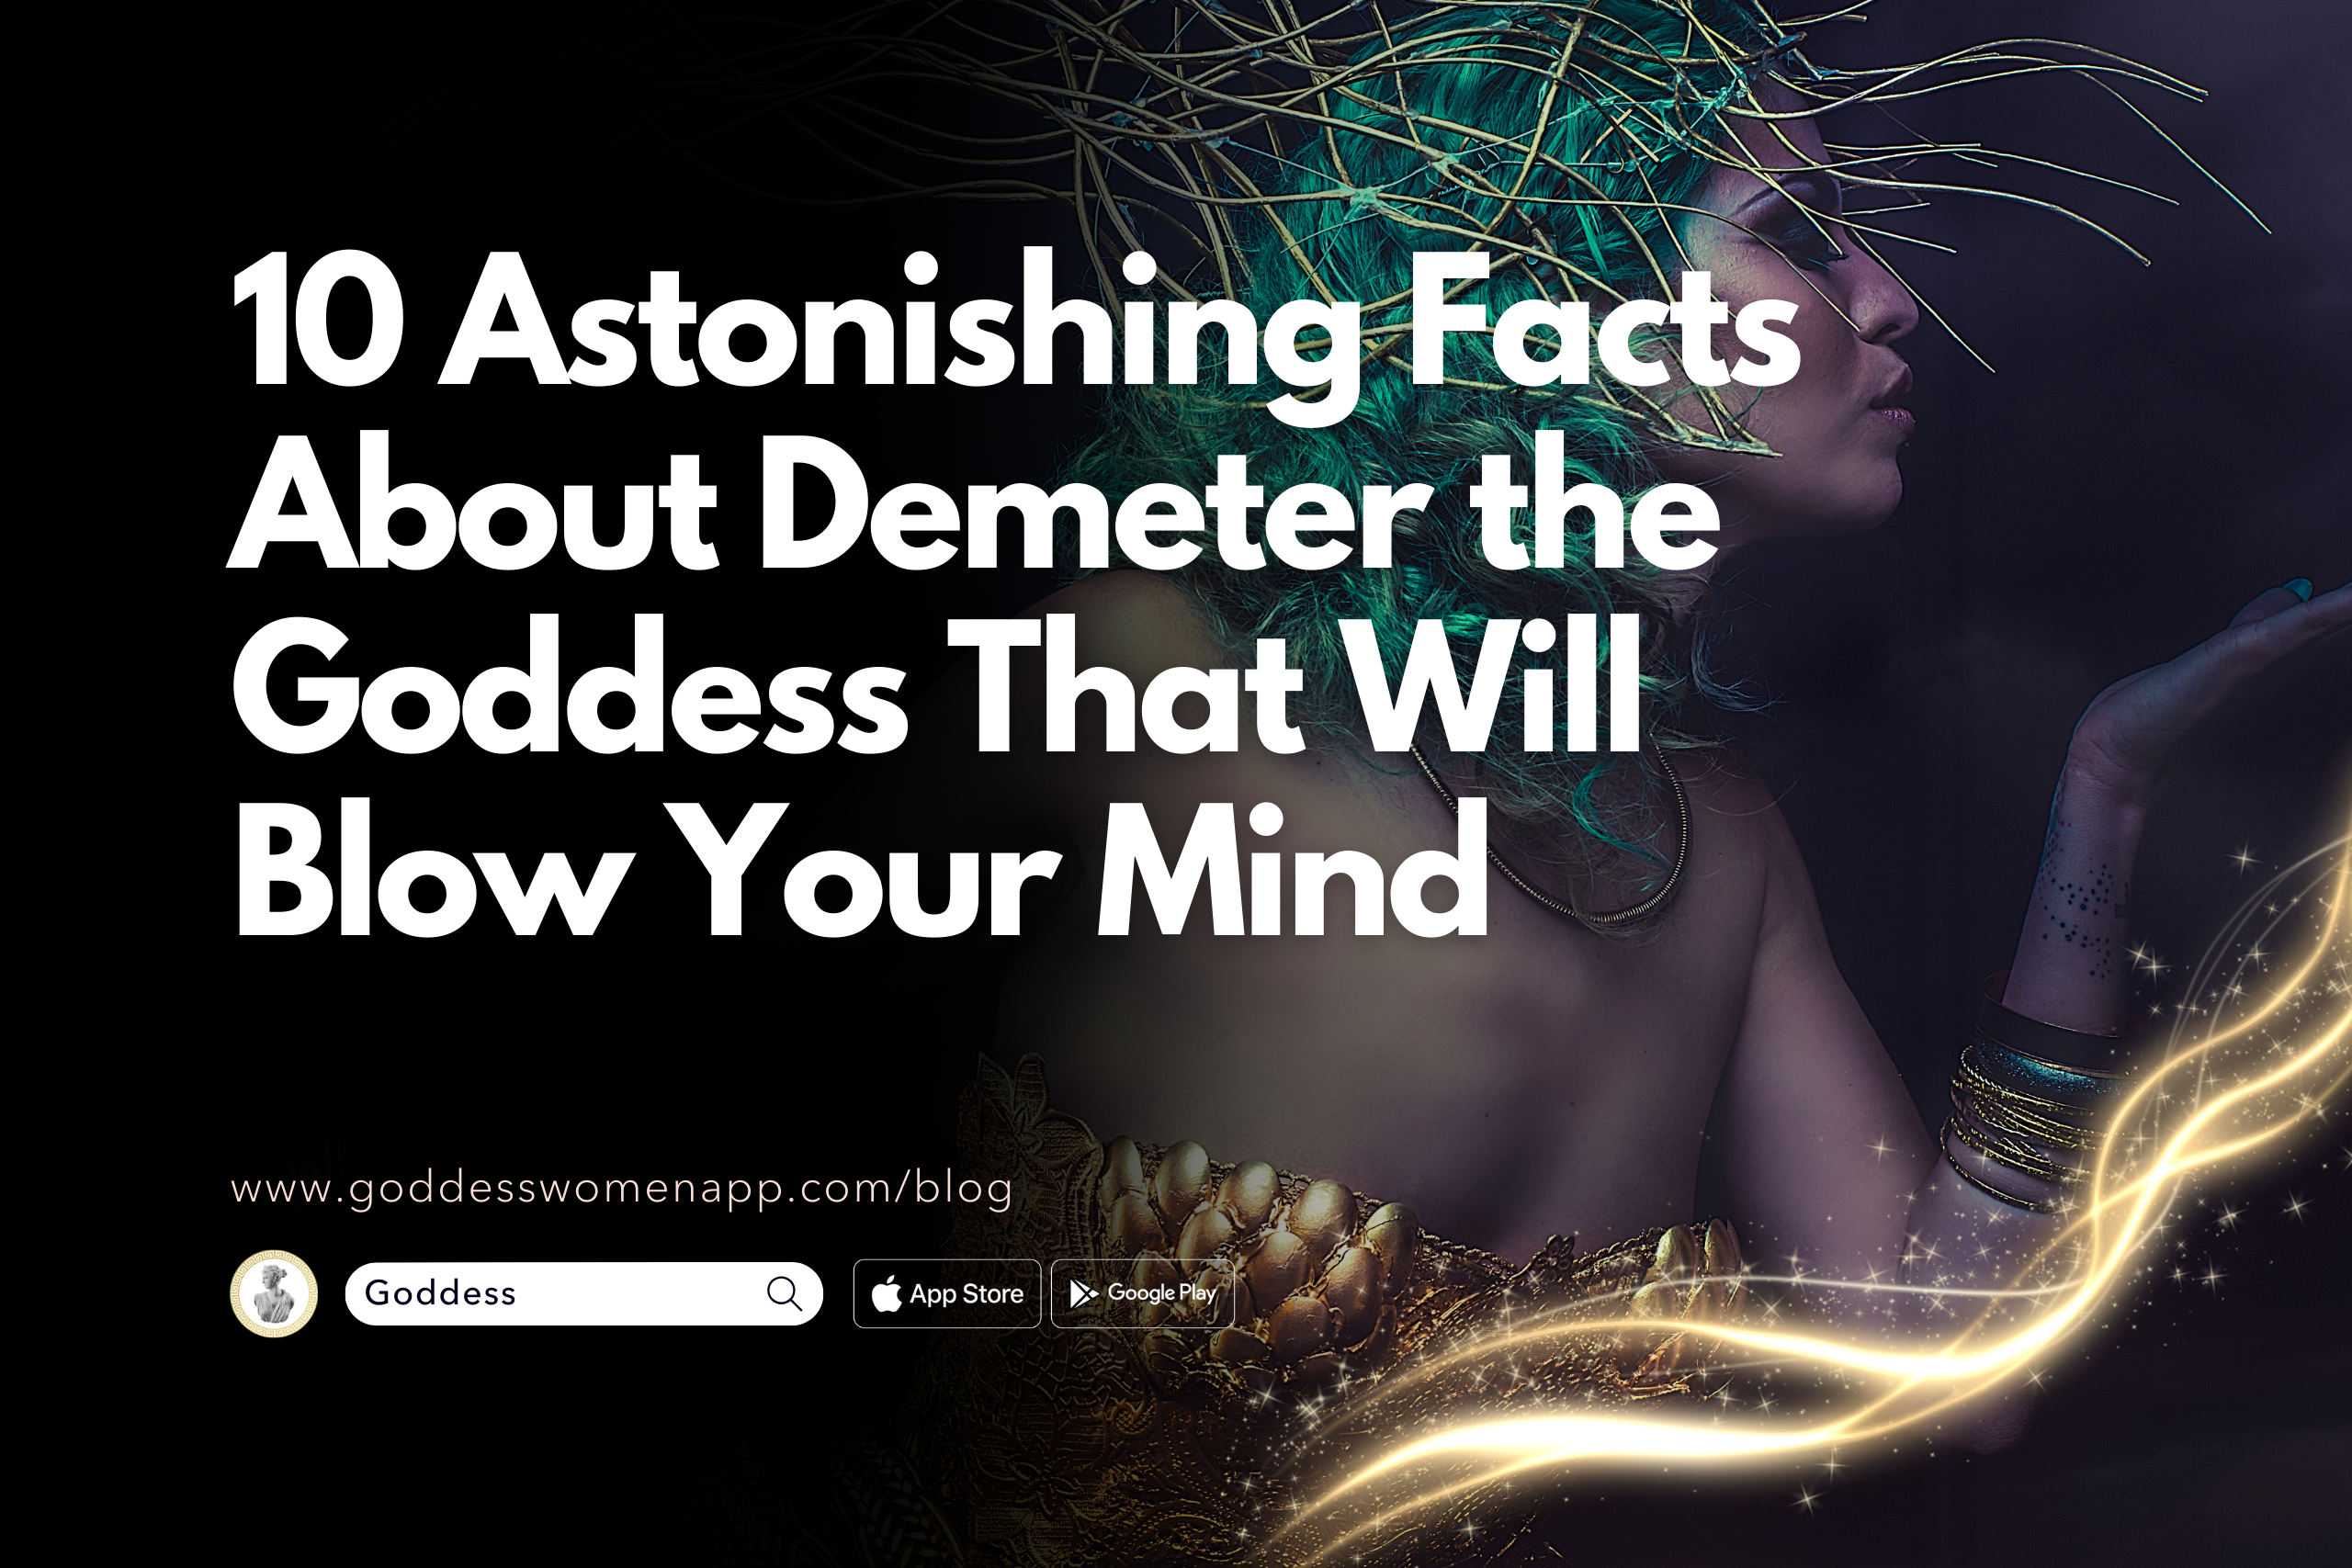 10 Astonishing Facts About Demeter the Goddess That Will Blow Your Mind